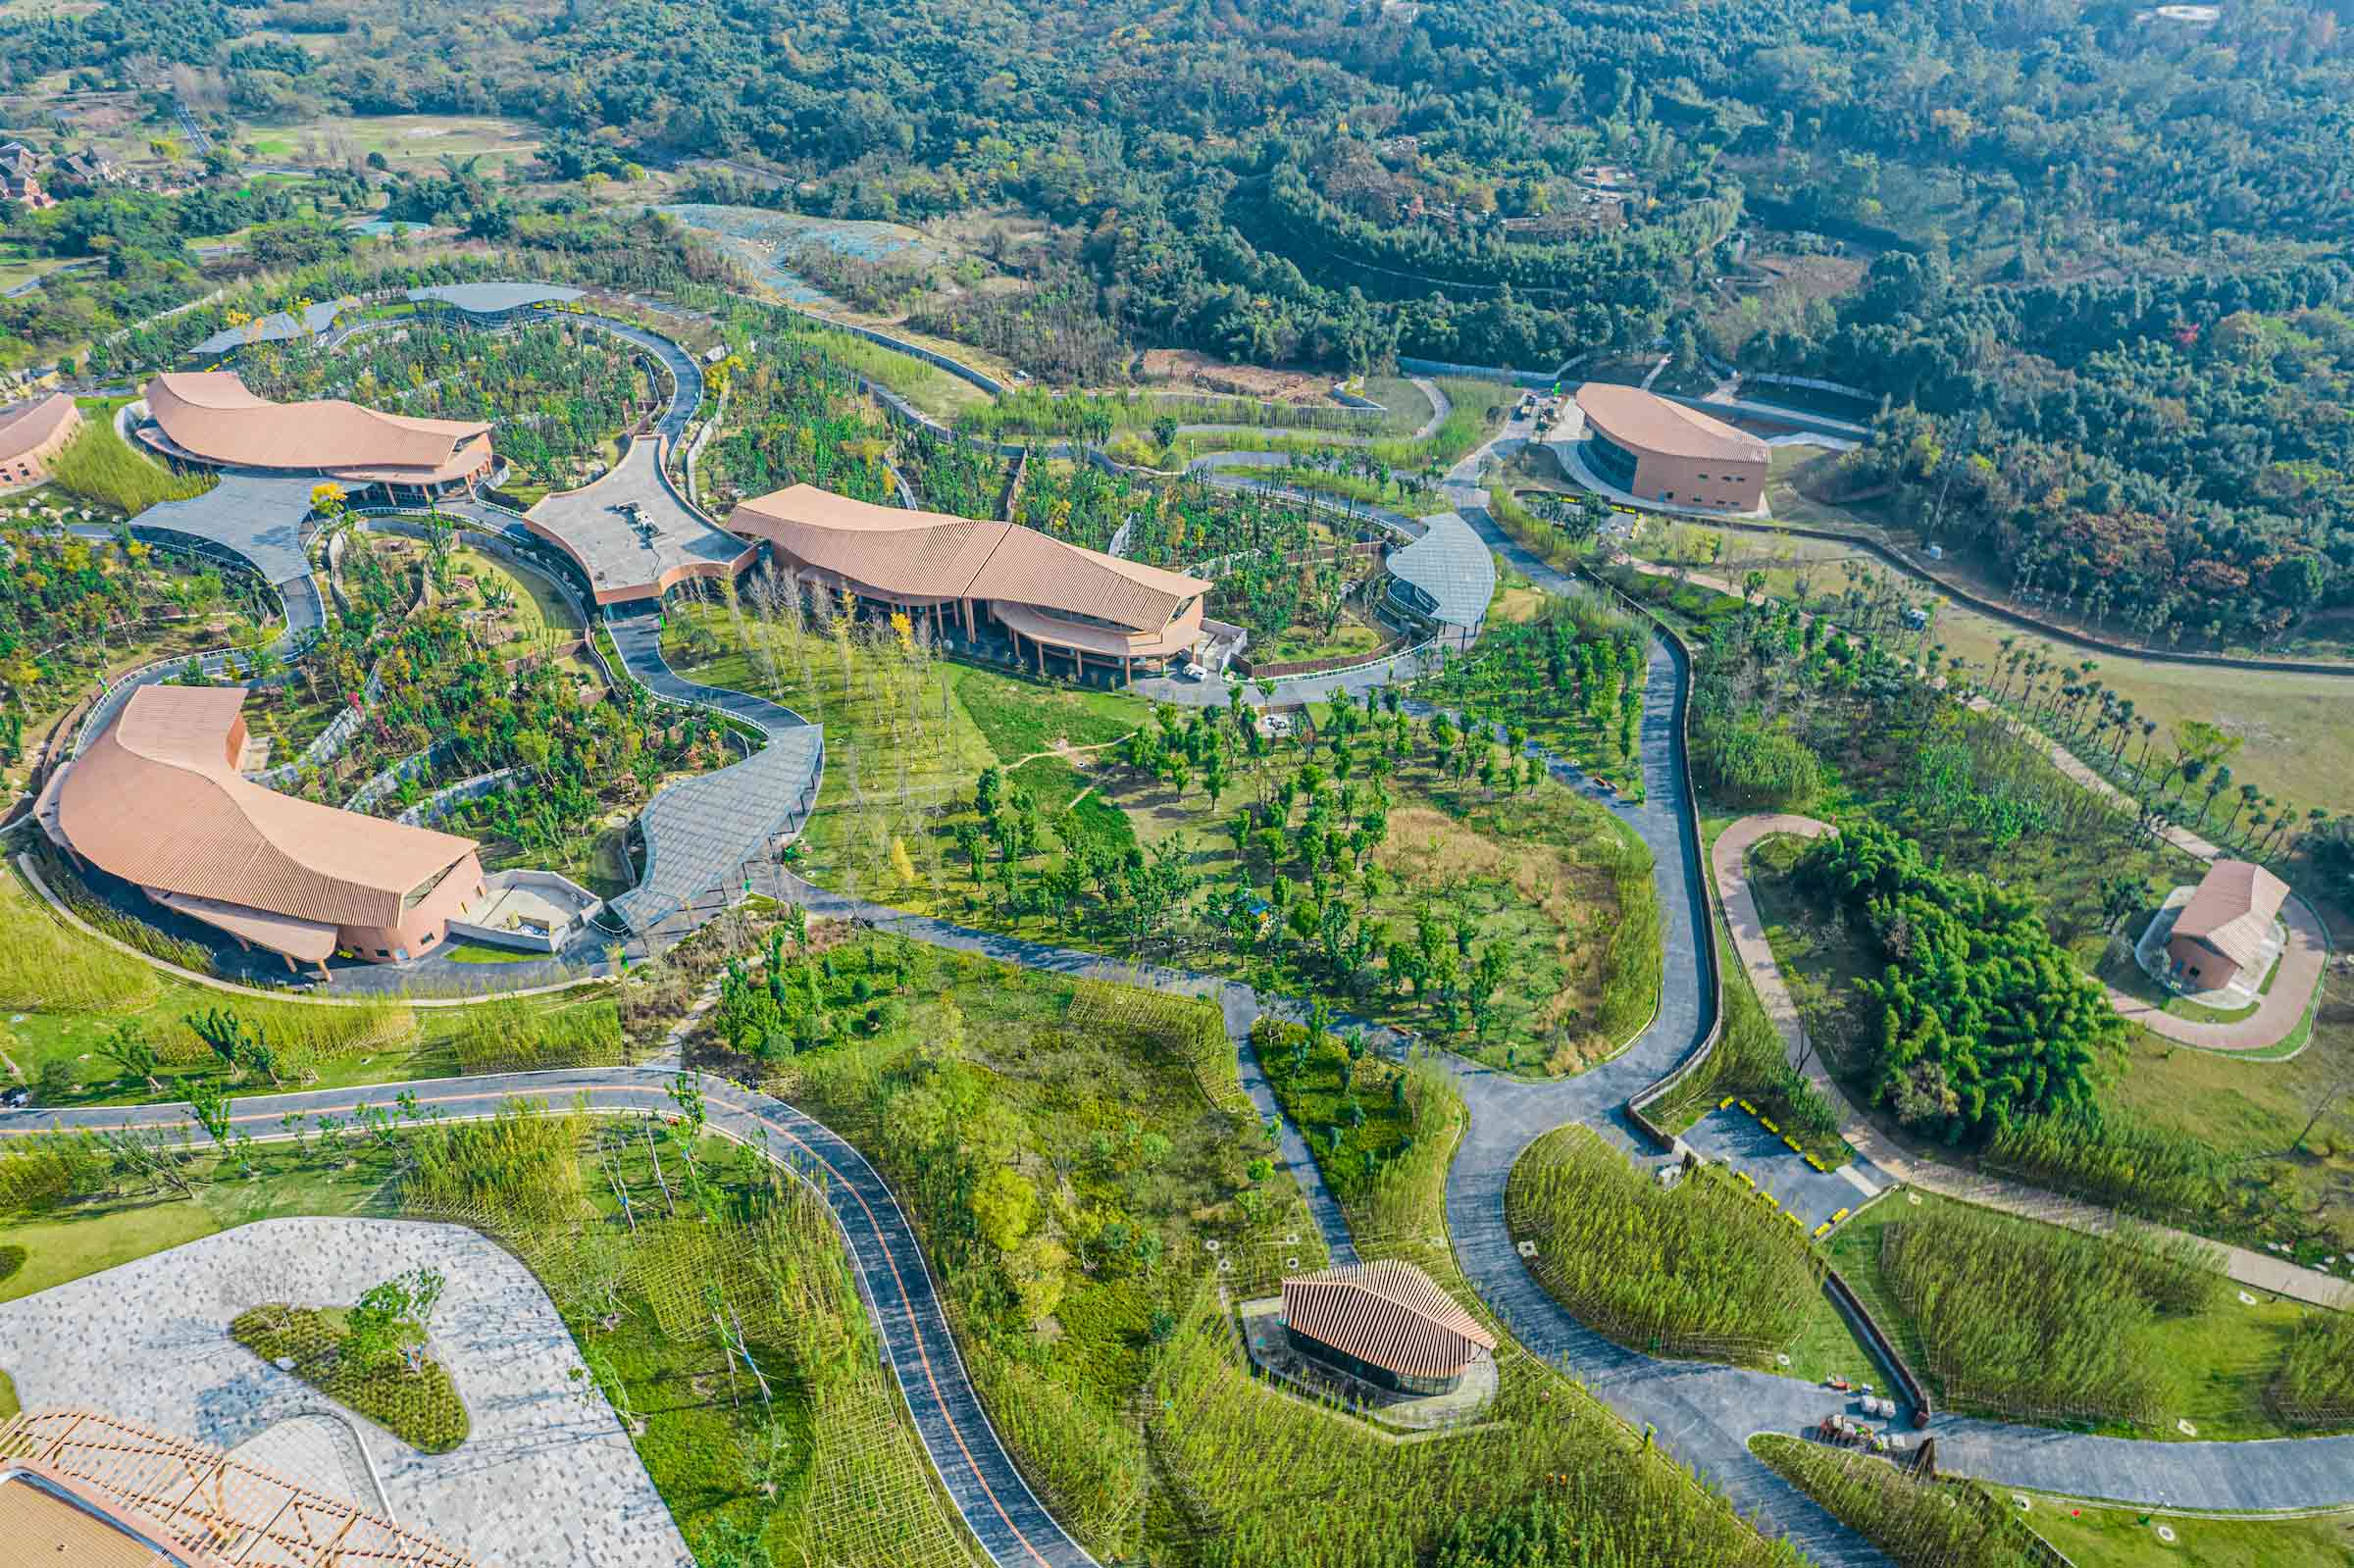 Chengdu Giant Panda Breeding Research Base Expansion Project by Shanghai TIANHUA Urban Planning & Design Co., Ltd.